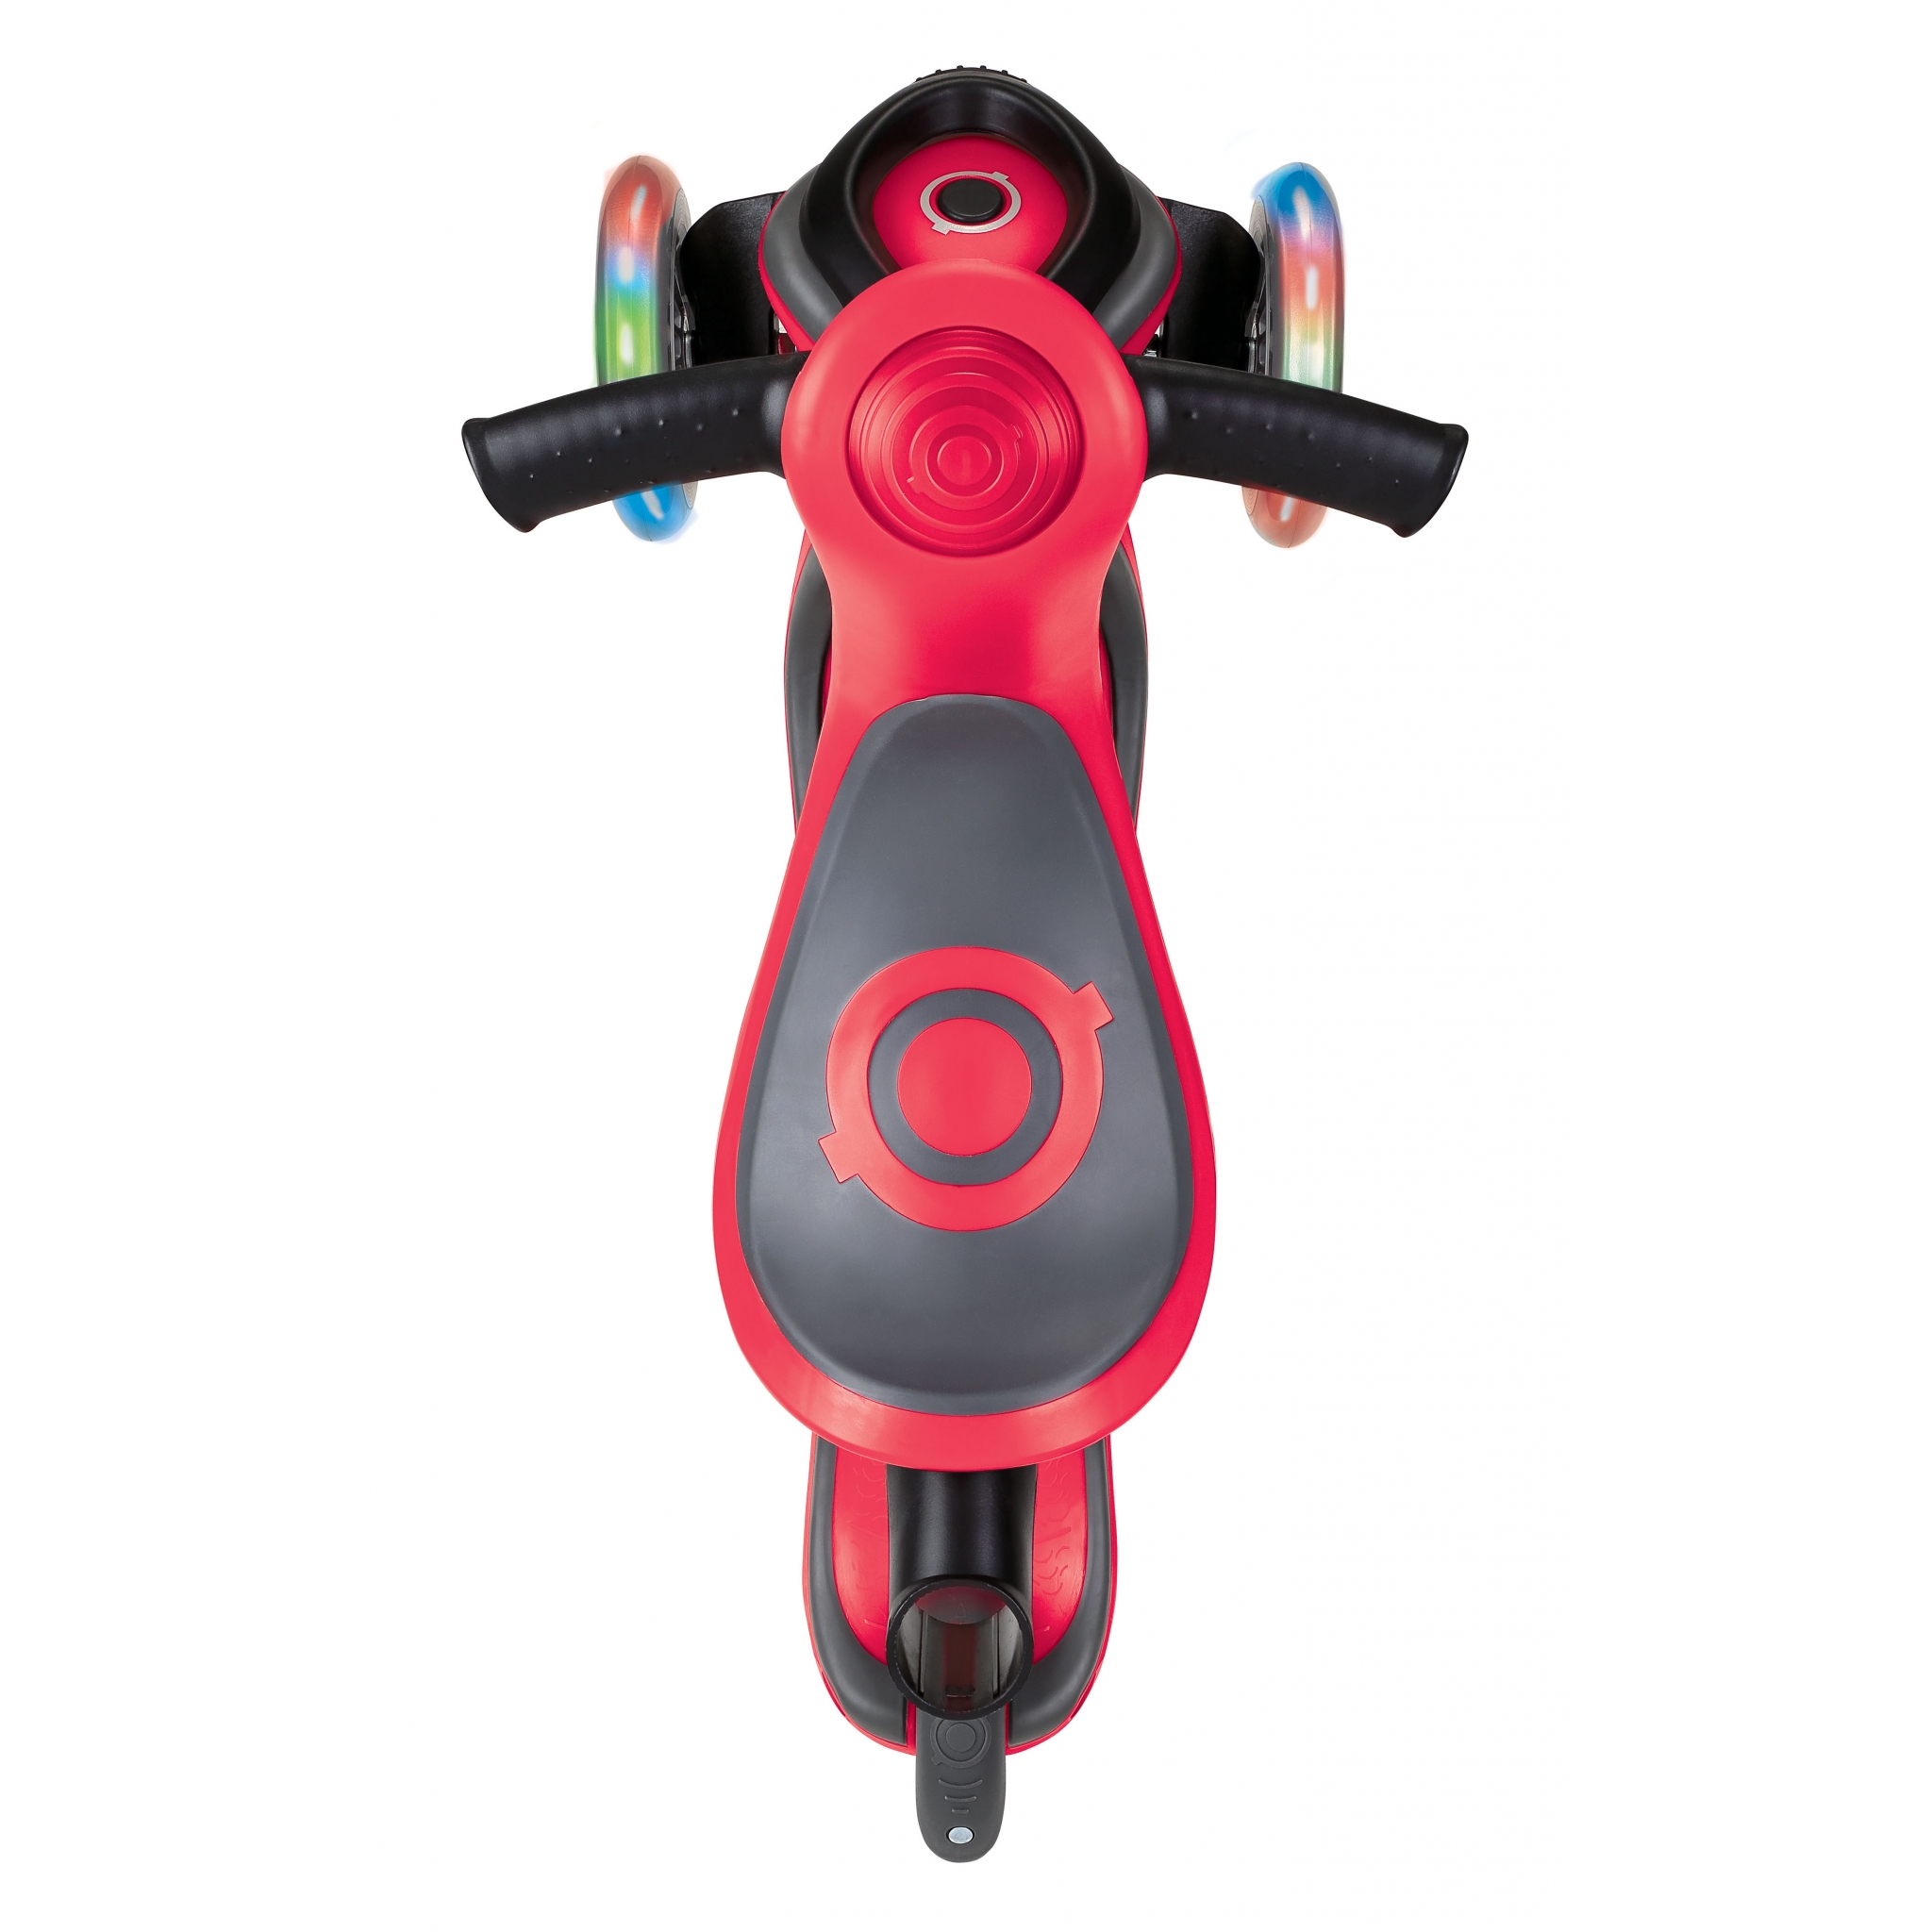 GO-UP-COMFORT-LIGHTS-scooter-with-seat-extra-wide-seat-for-maximum-comfort-new-red 3